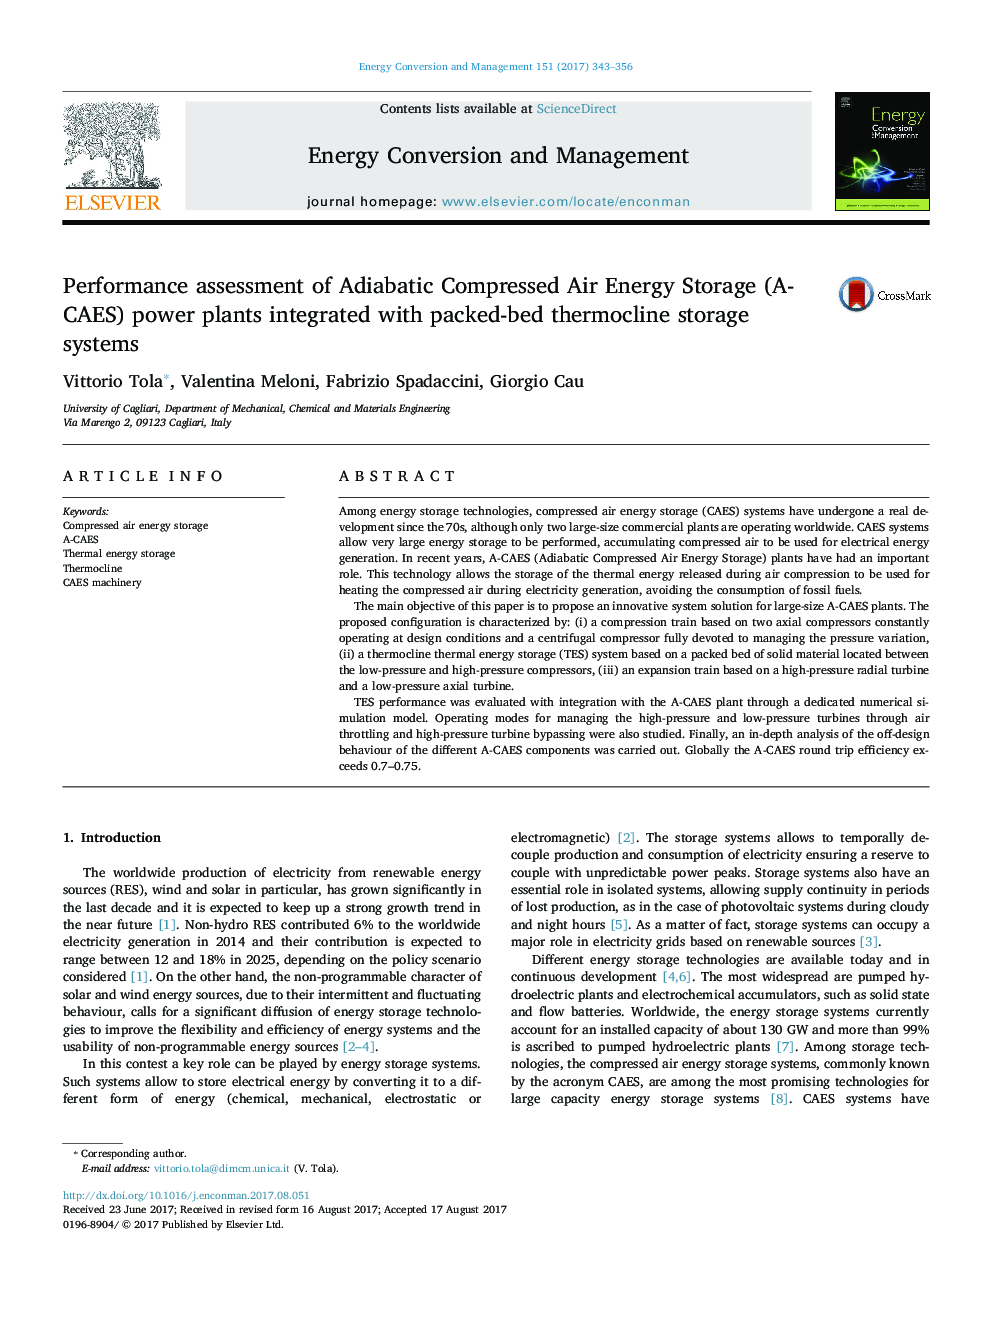 Performance assessment of Adiabatic Compressed Air Energy Storage (A-CAES) power plants integrated with packed-bed thermocline storage systems